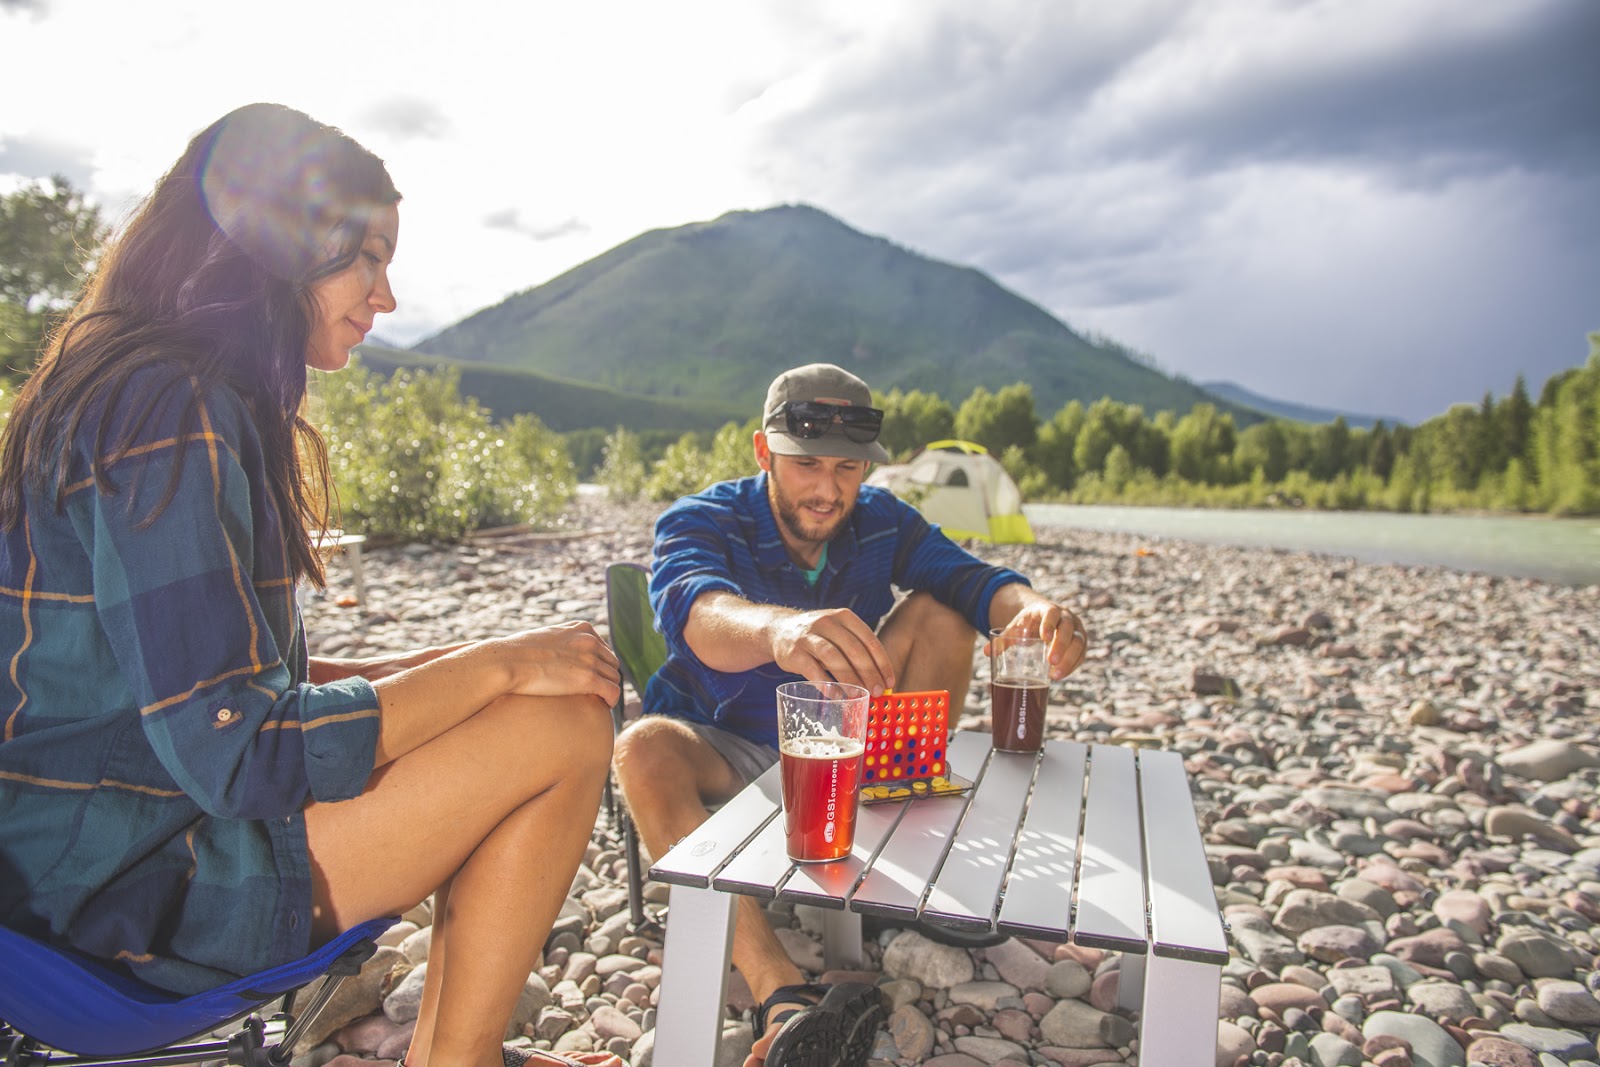 Find The Right Camp Game For Your Adventure